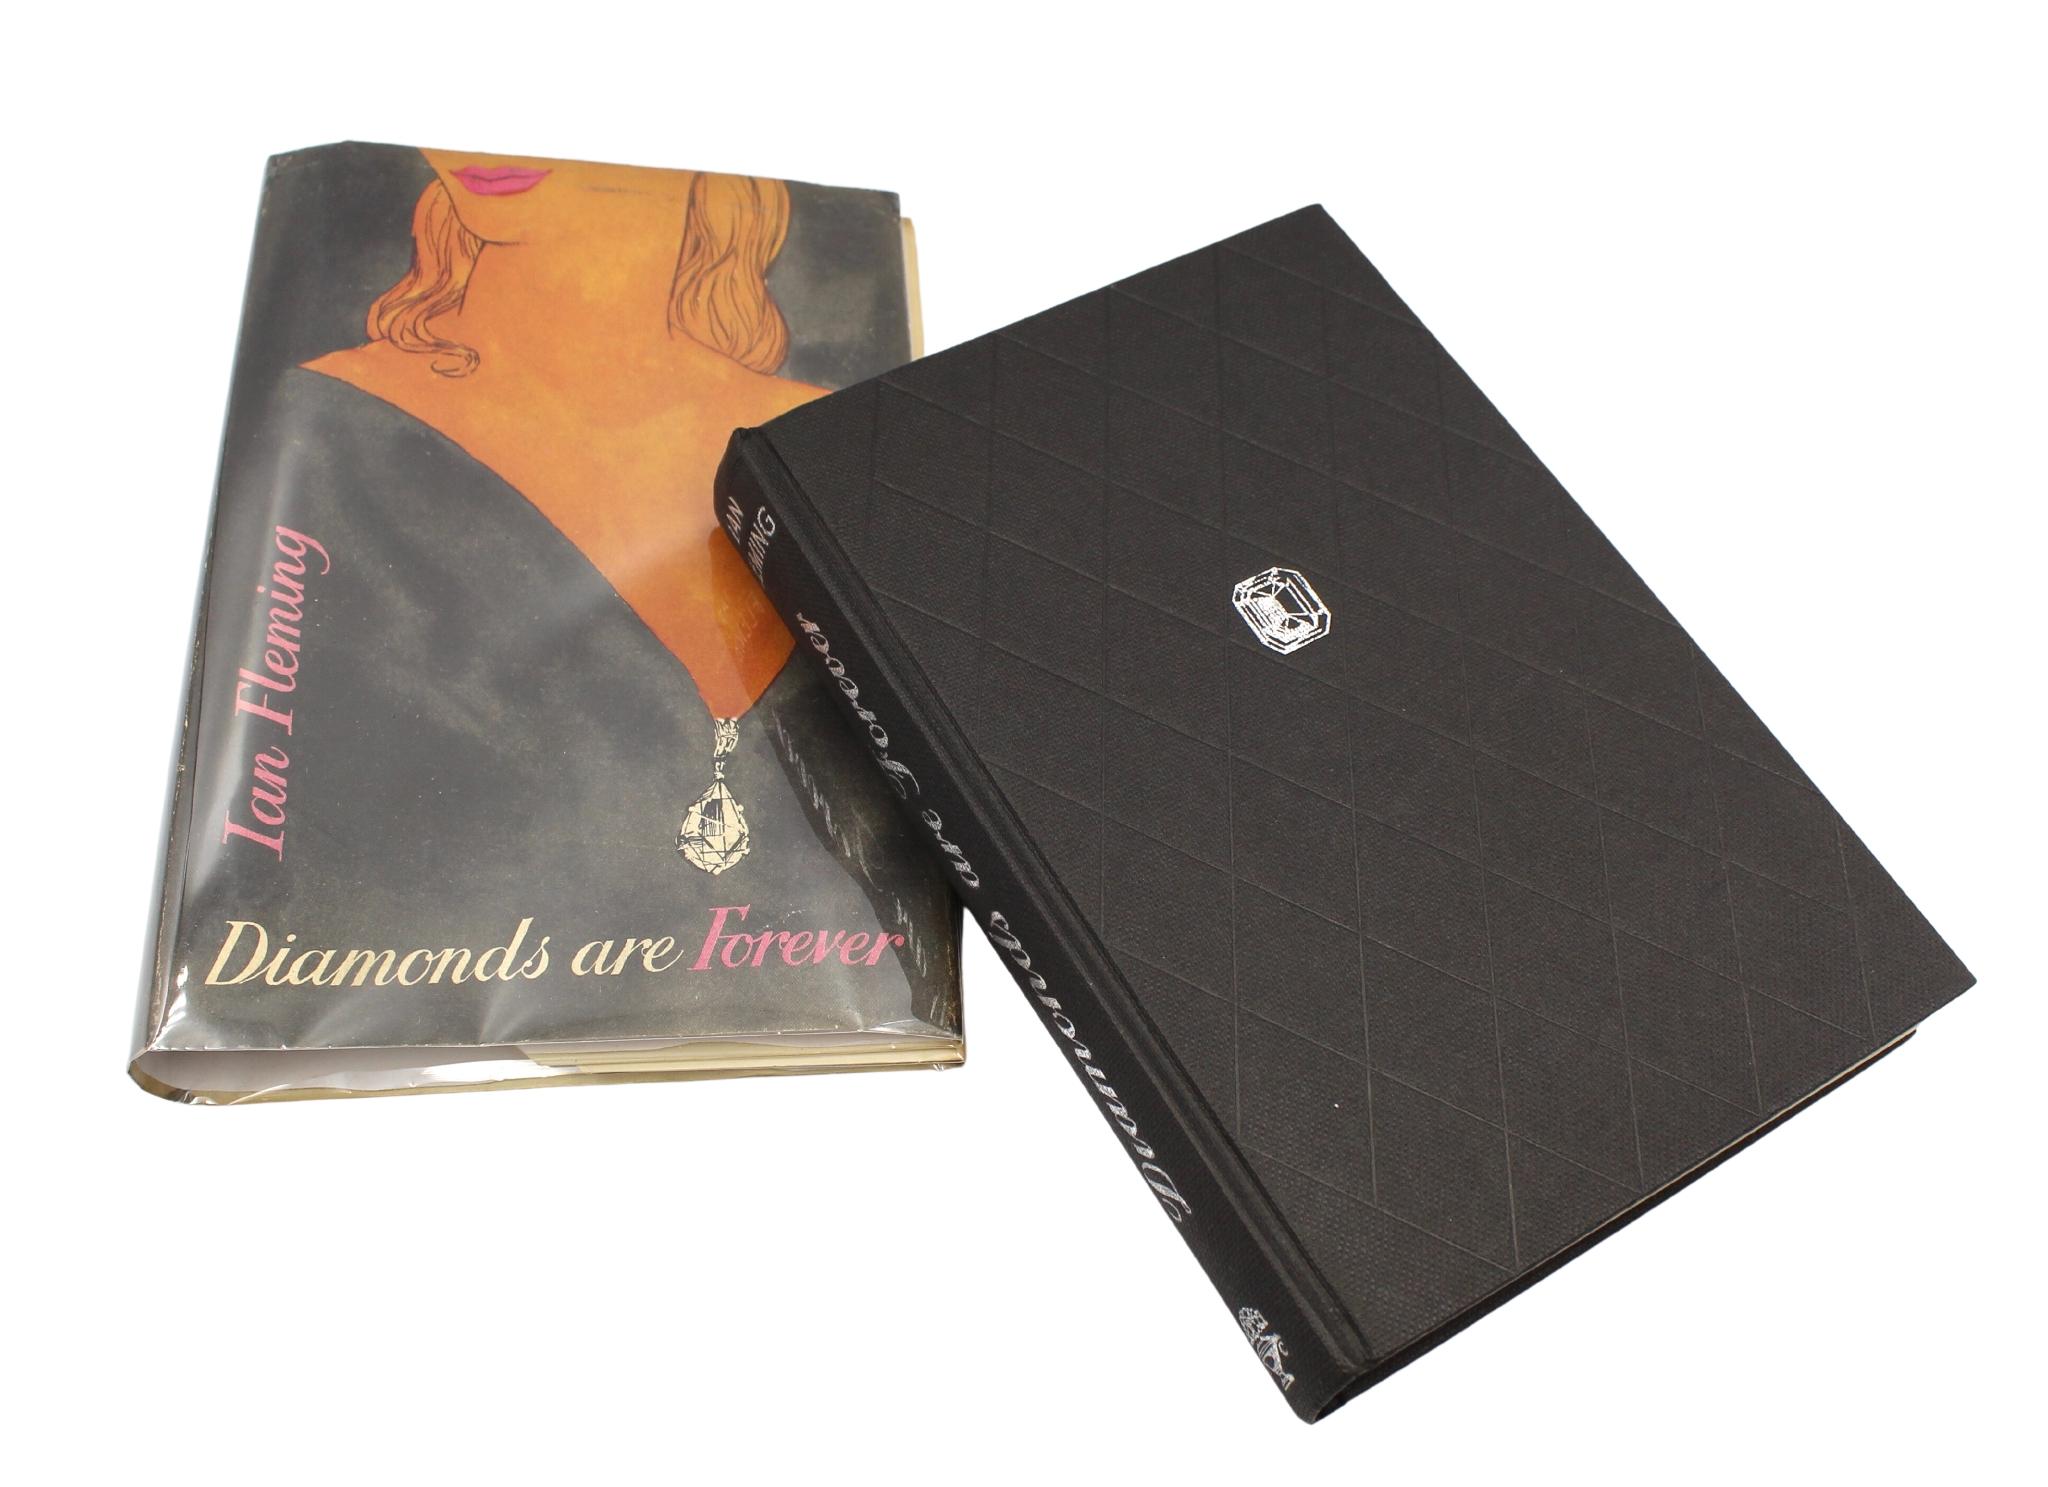 Diamonds are Forever by Ian Fleming, First Edition in Original Dust Jacket, 1956 2